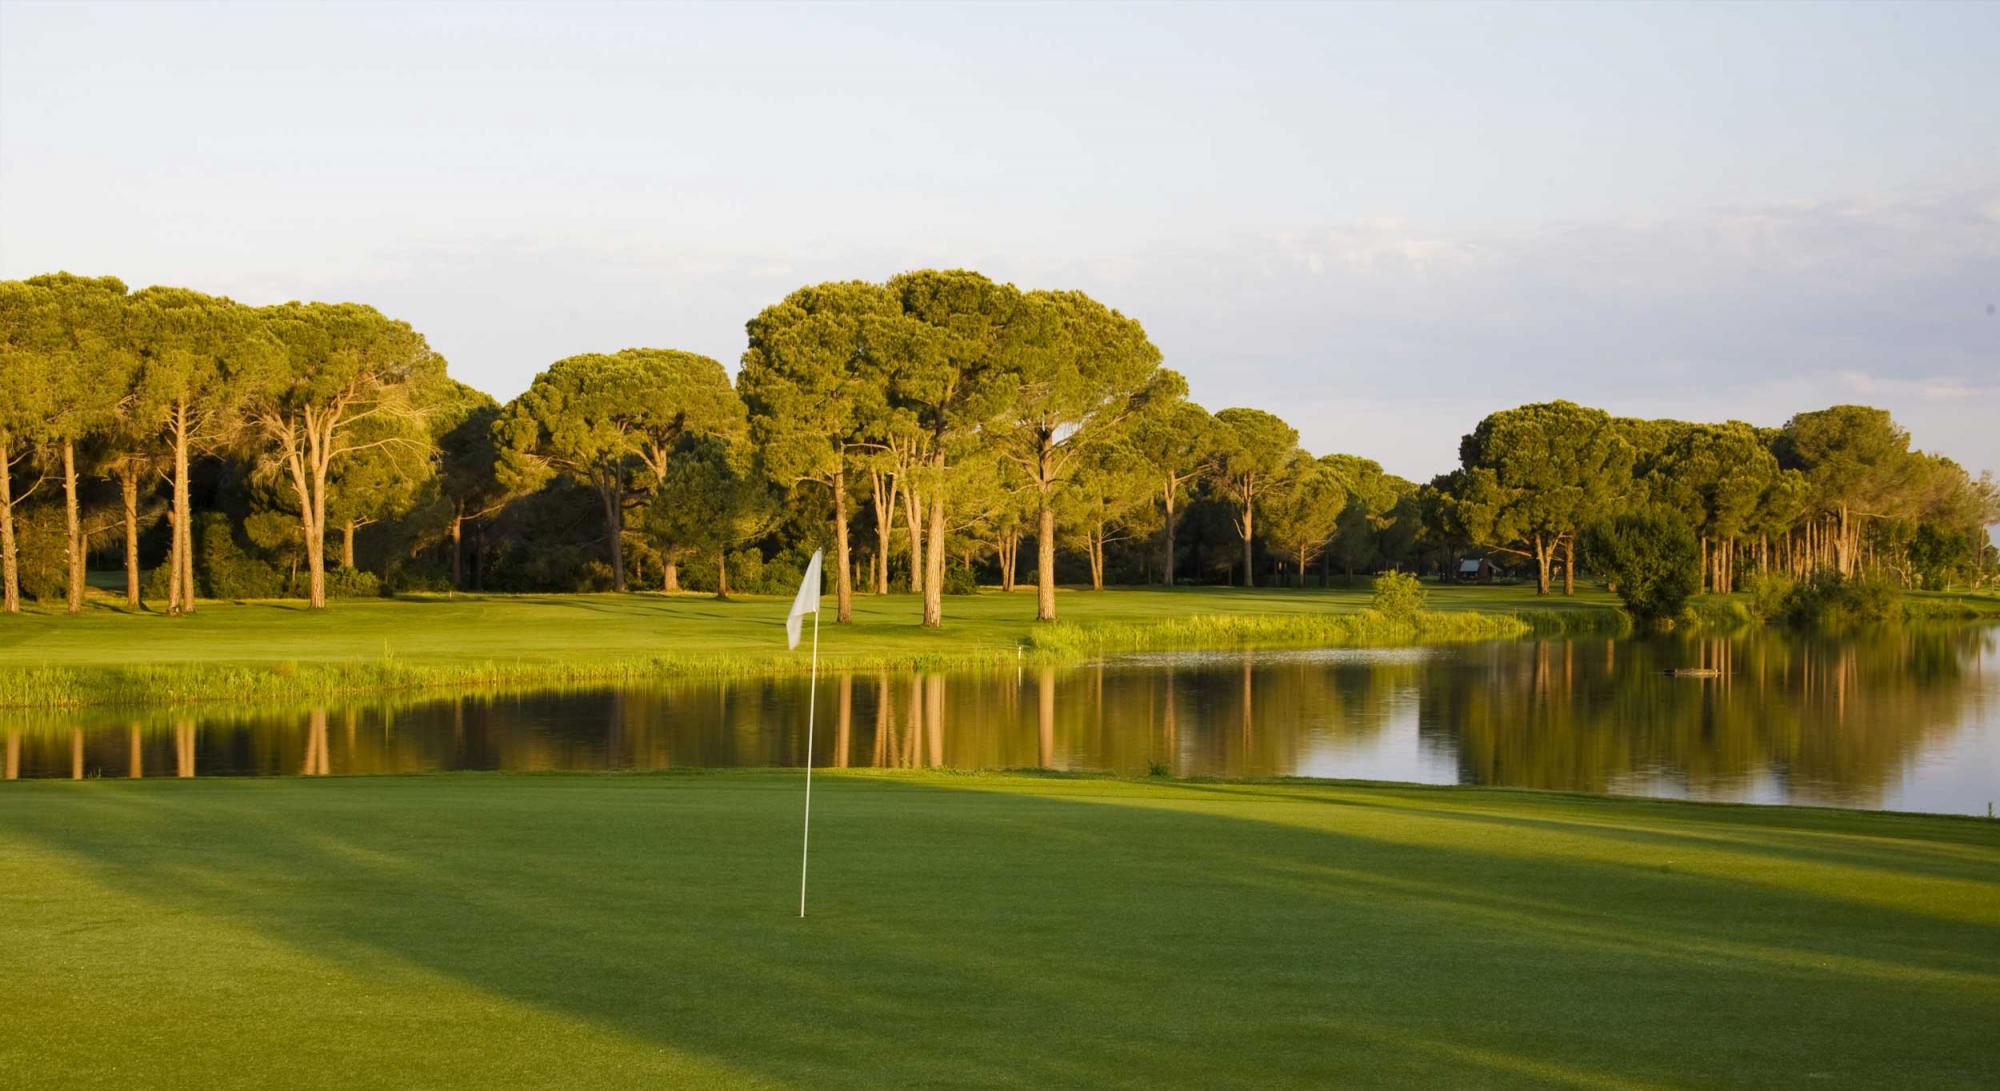 The Robinson Nobilis Golf Club's lovely golf course situated in brilliant Belek.